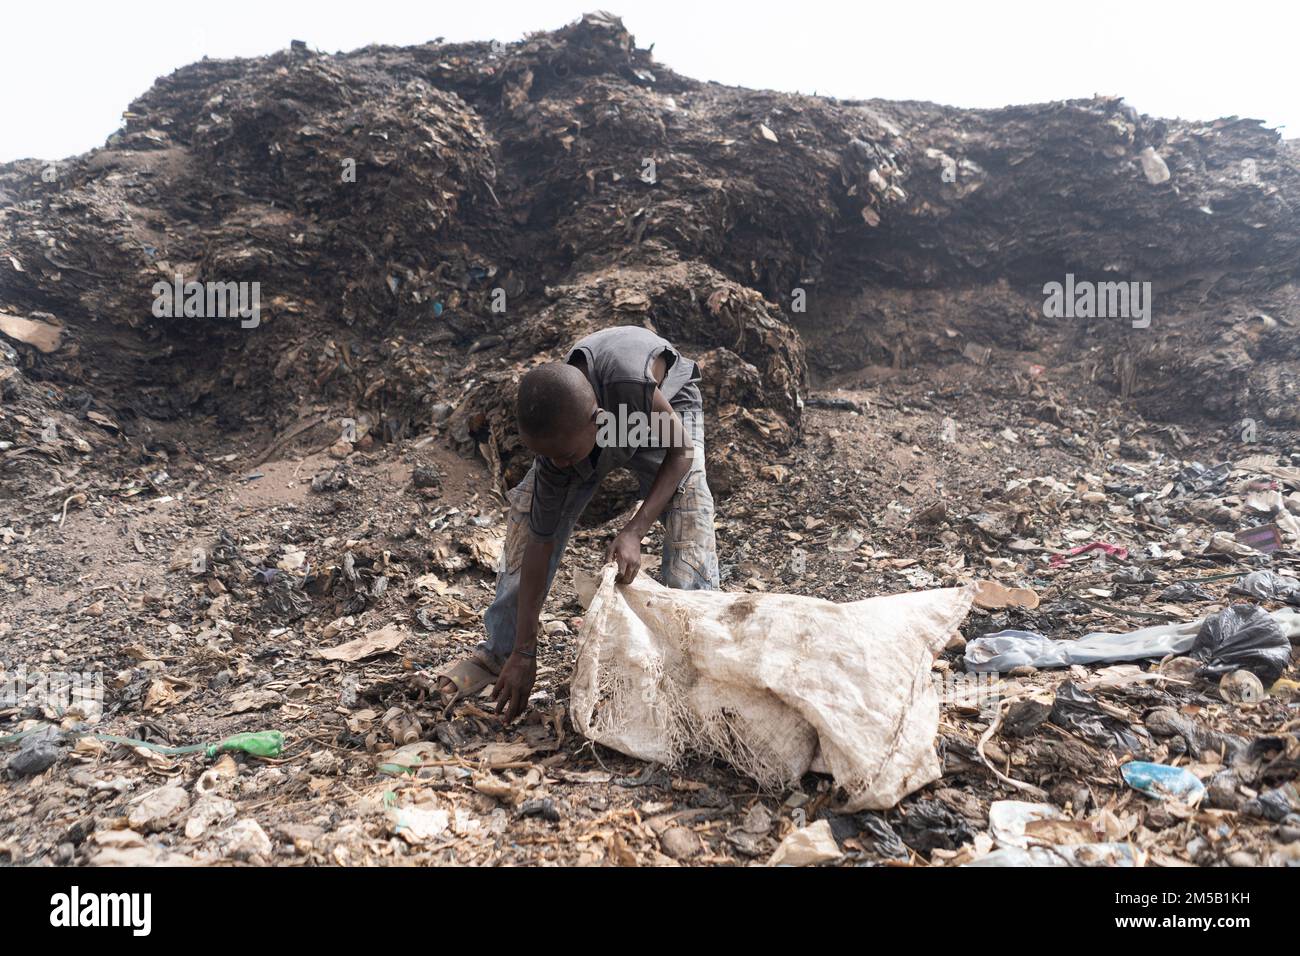 African slum boy collecting reusable items in a garbage dump; symbol of poverty in developing countries Stock Photo